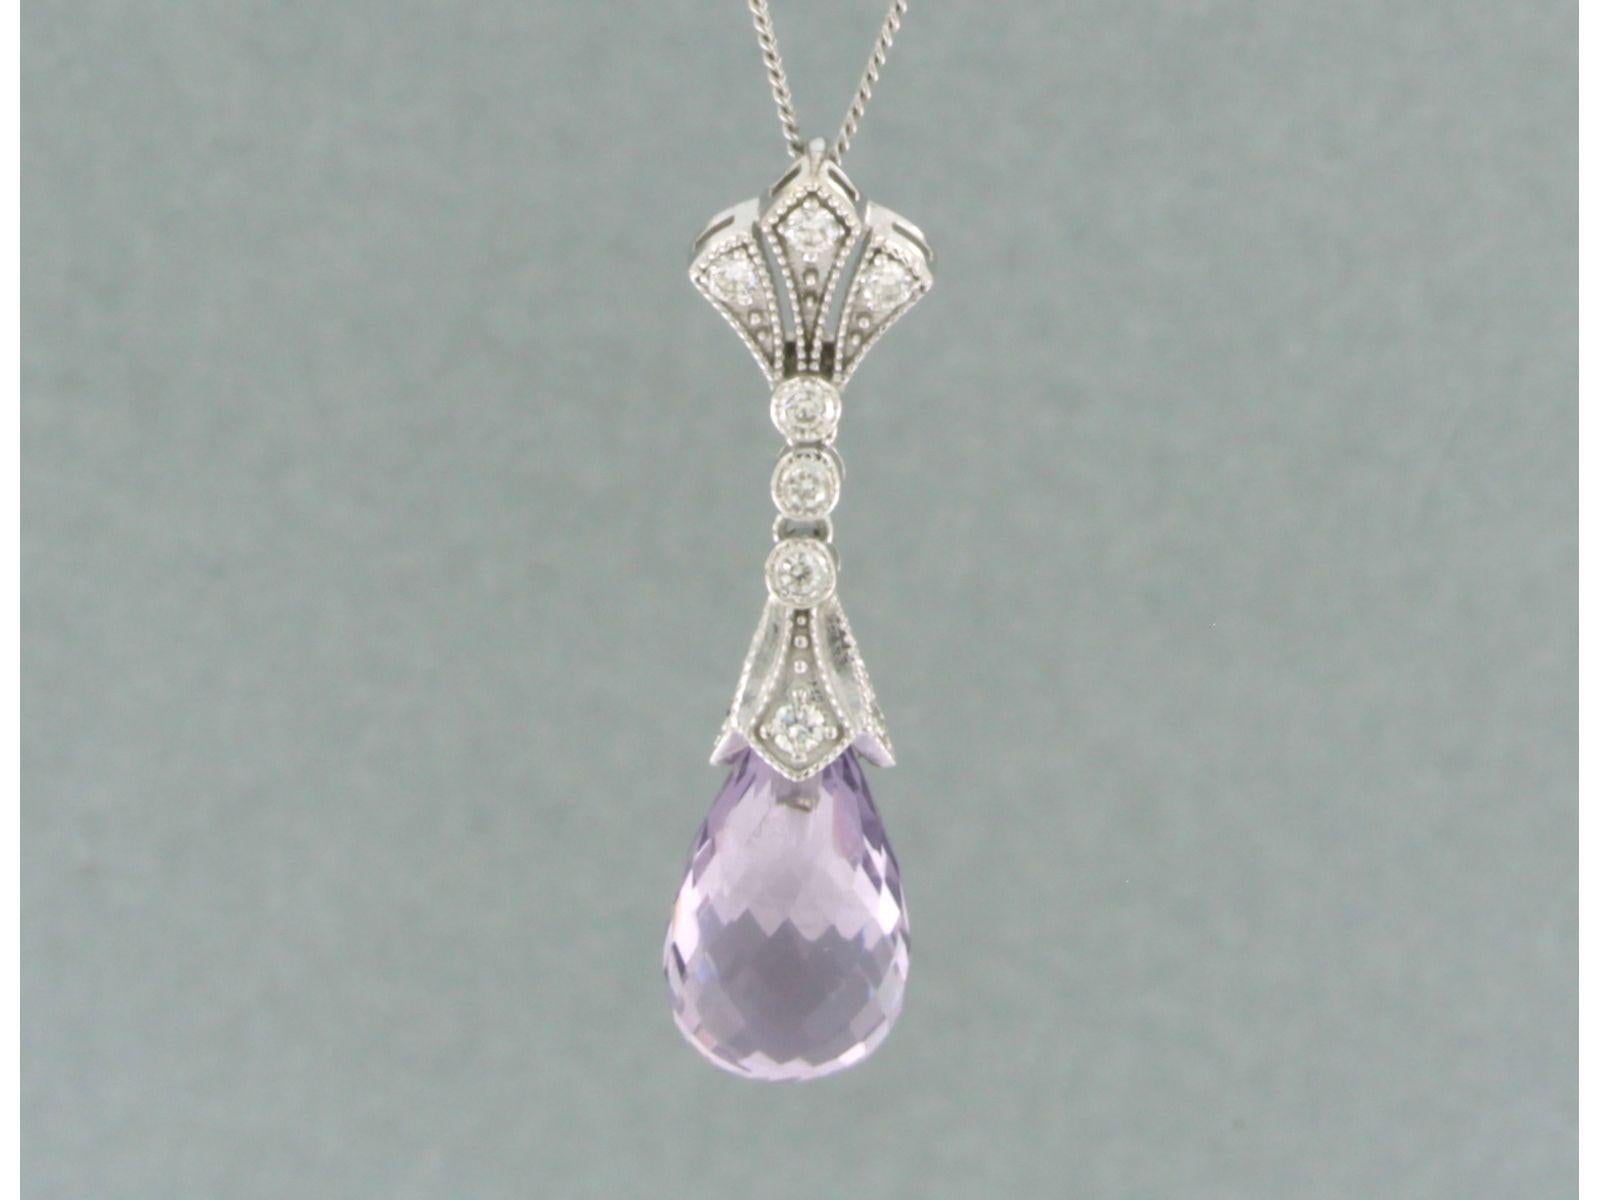 Modern Chain and Pendant with Amethyst and diamonds 14k white gold